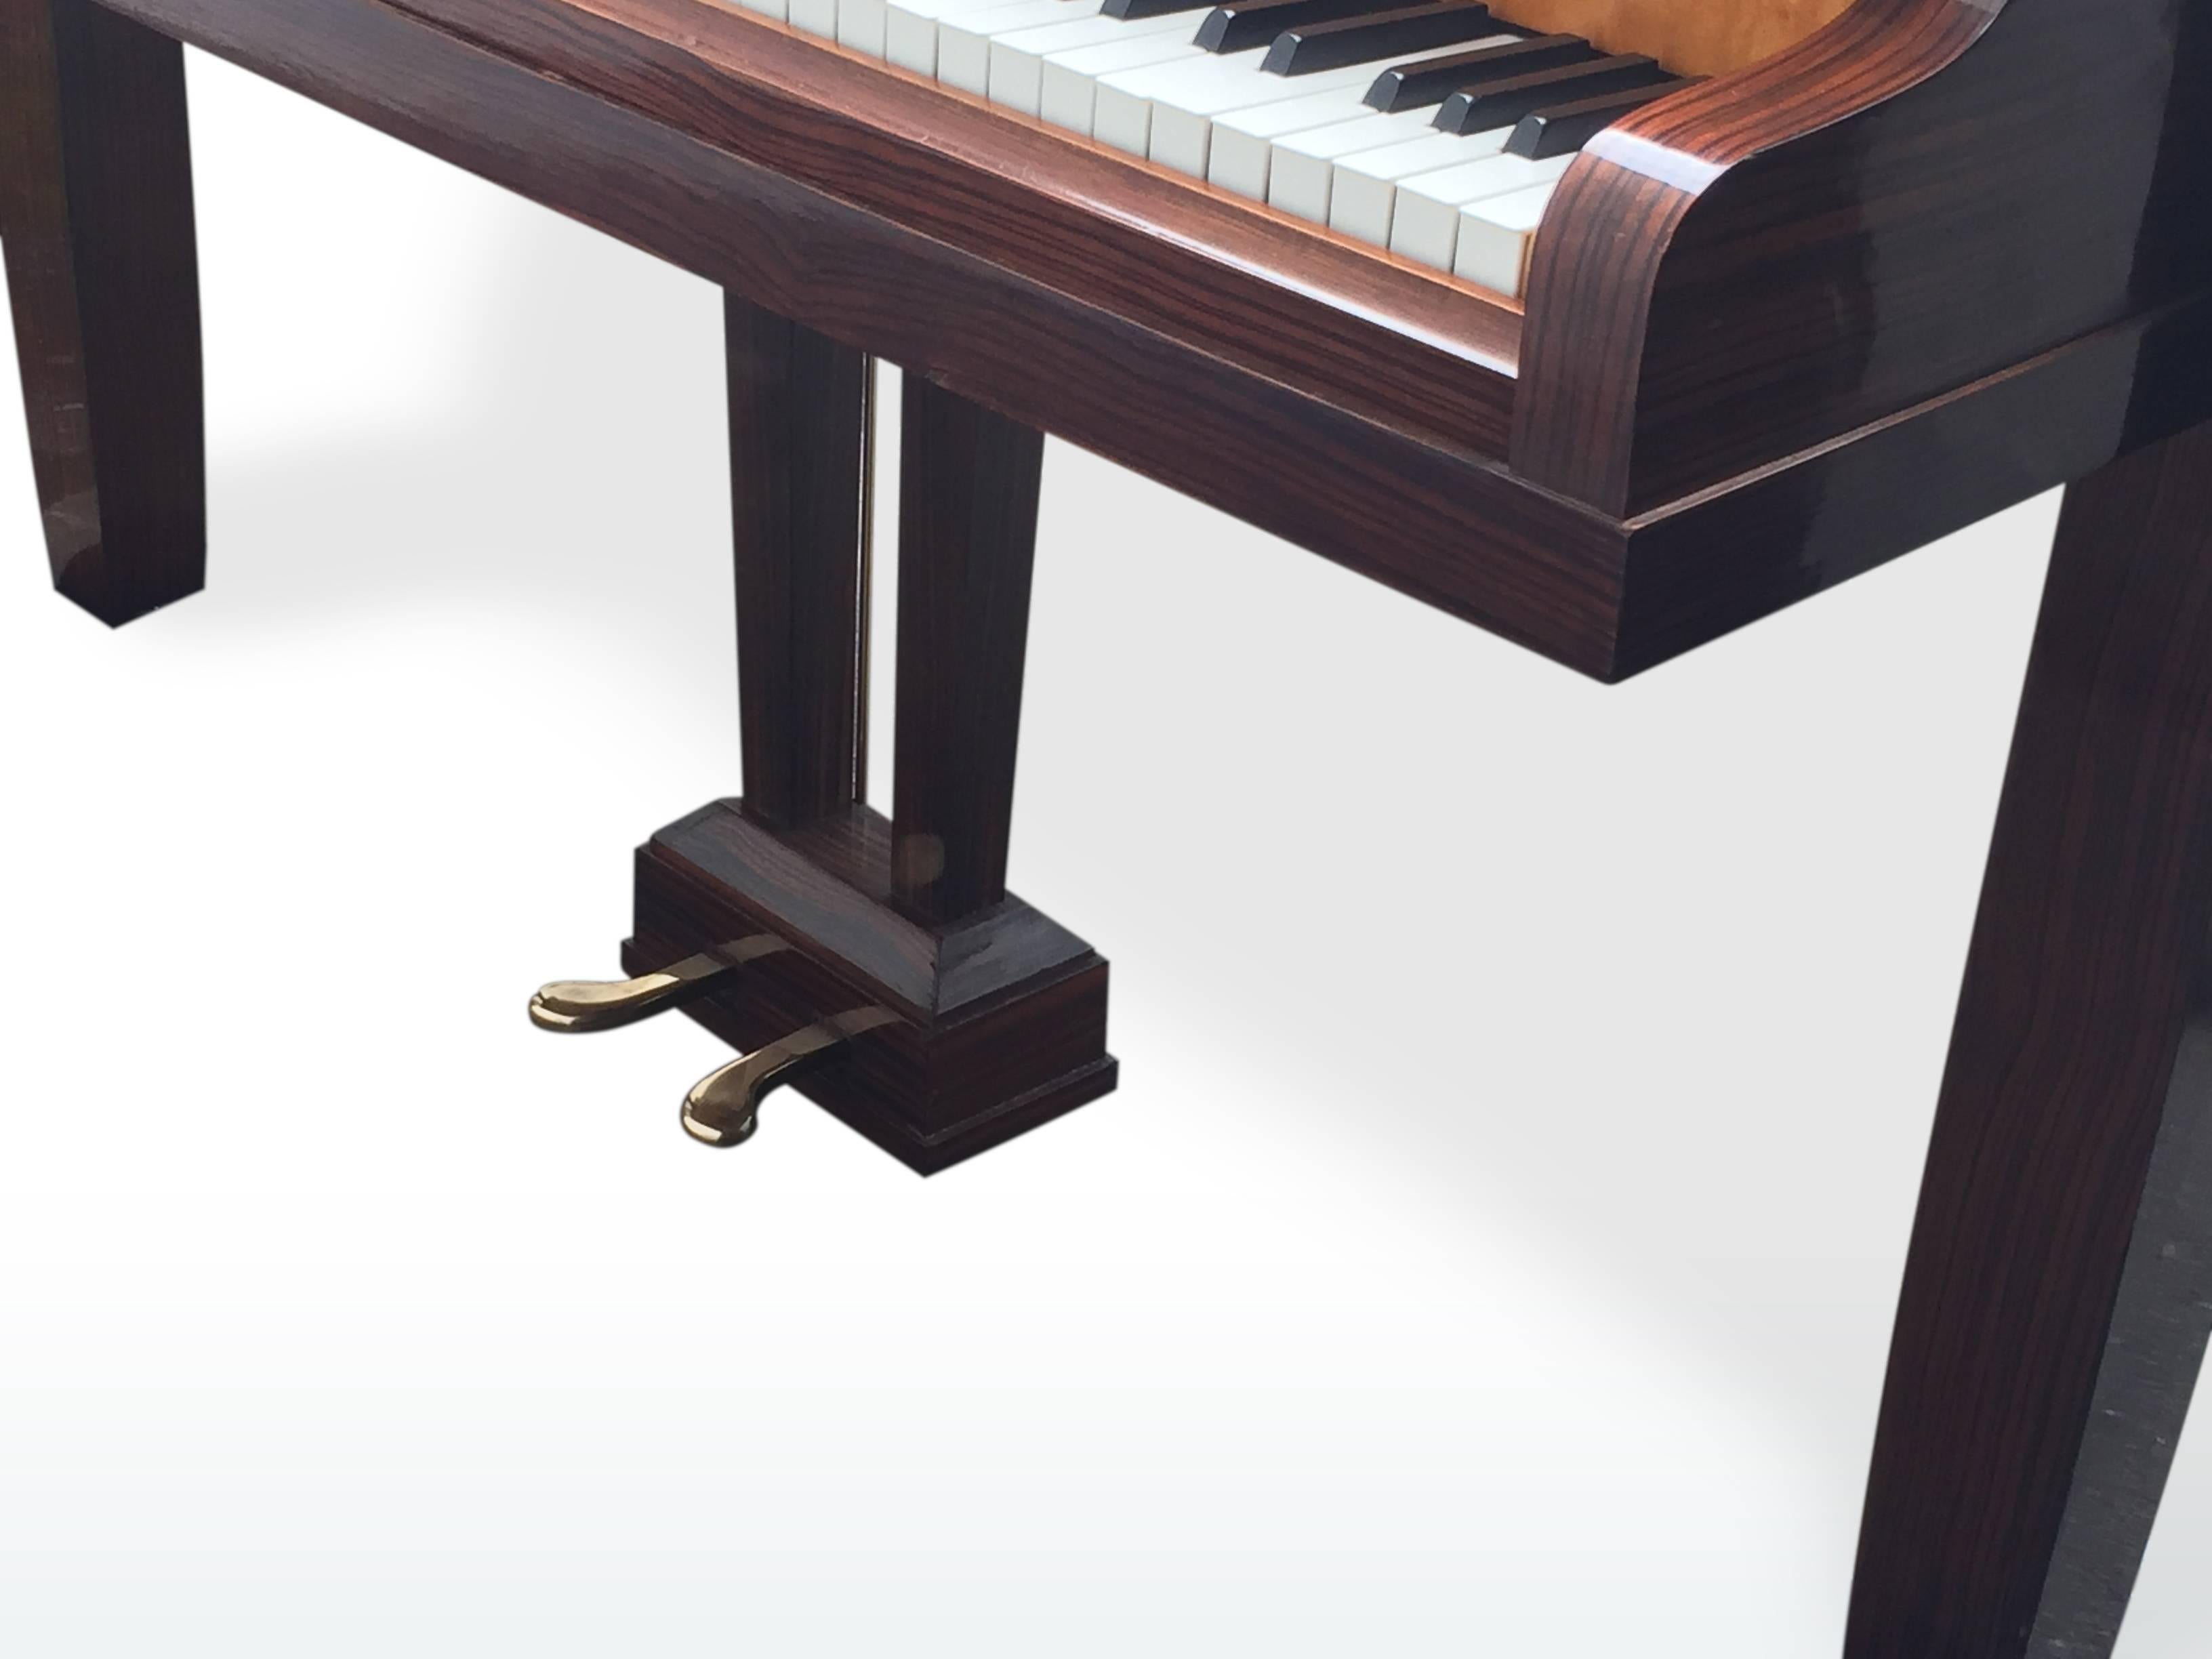 A real period Art Deco/ Mid-Century-Modern/ Modernist baby grand piano by Pleyel, Paris, manufactured approximately in the year 1956. The bi-colored veneer is made of Macassar ebony and beautiful French citrus wood. The lemon wood looks a bit like